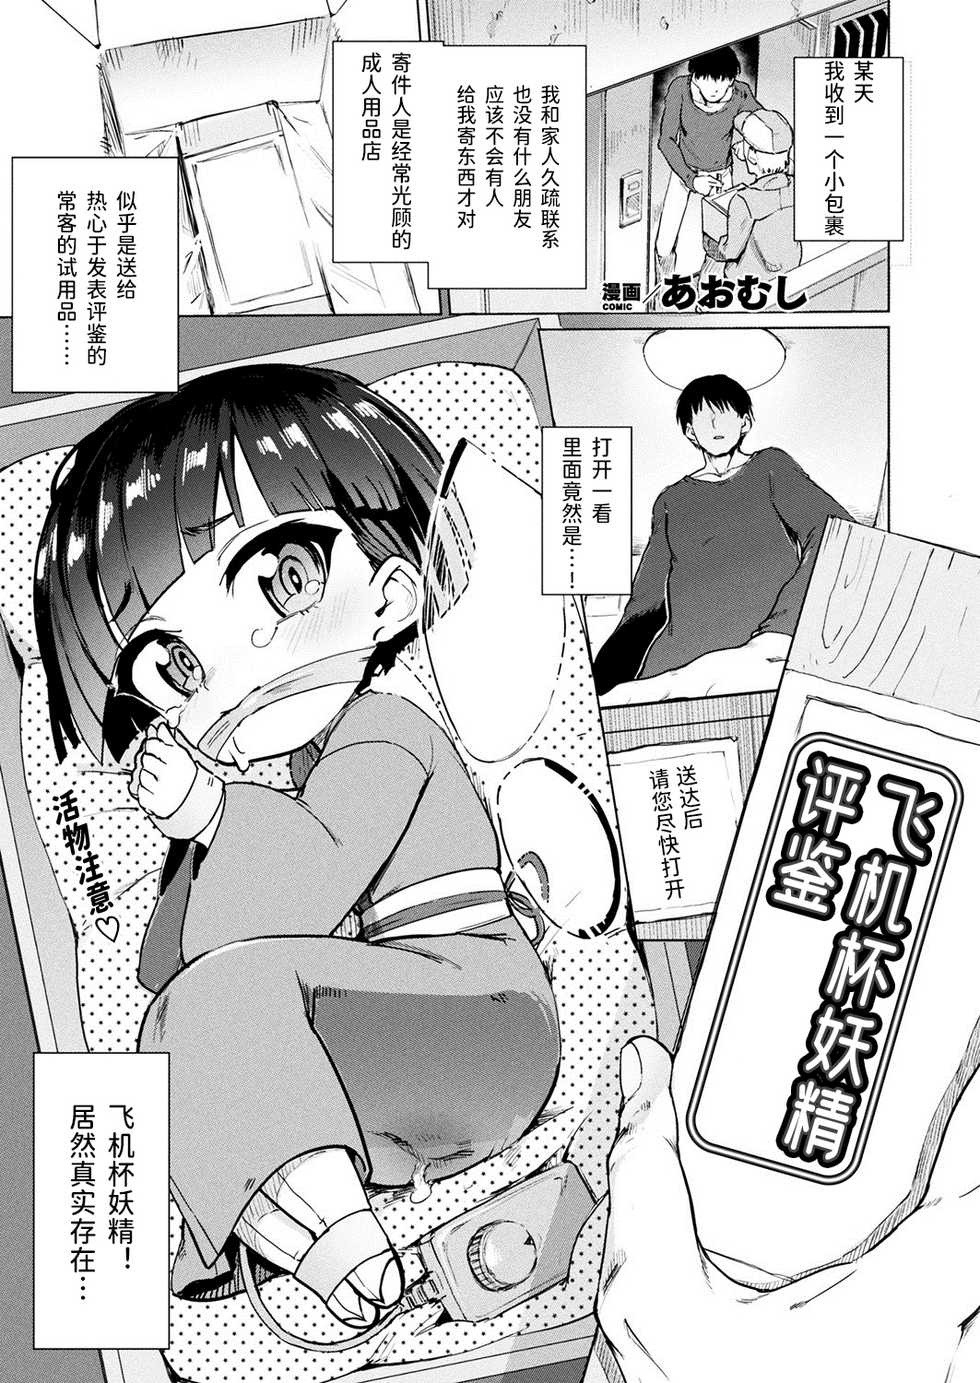 [Aomushi] Onaho Yousei Review | 飞机杯妖精评鉴 (COMIC Unreal 2020-06 Vol. 85) [Chinese] [风油精汉化组] [Digital] - Page 2